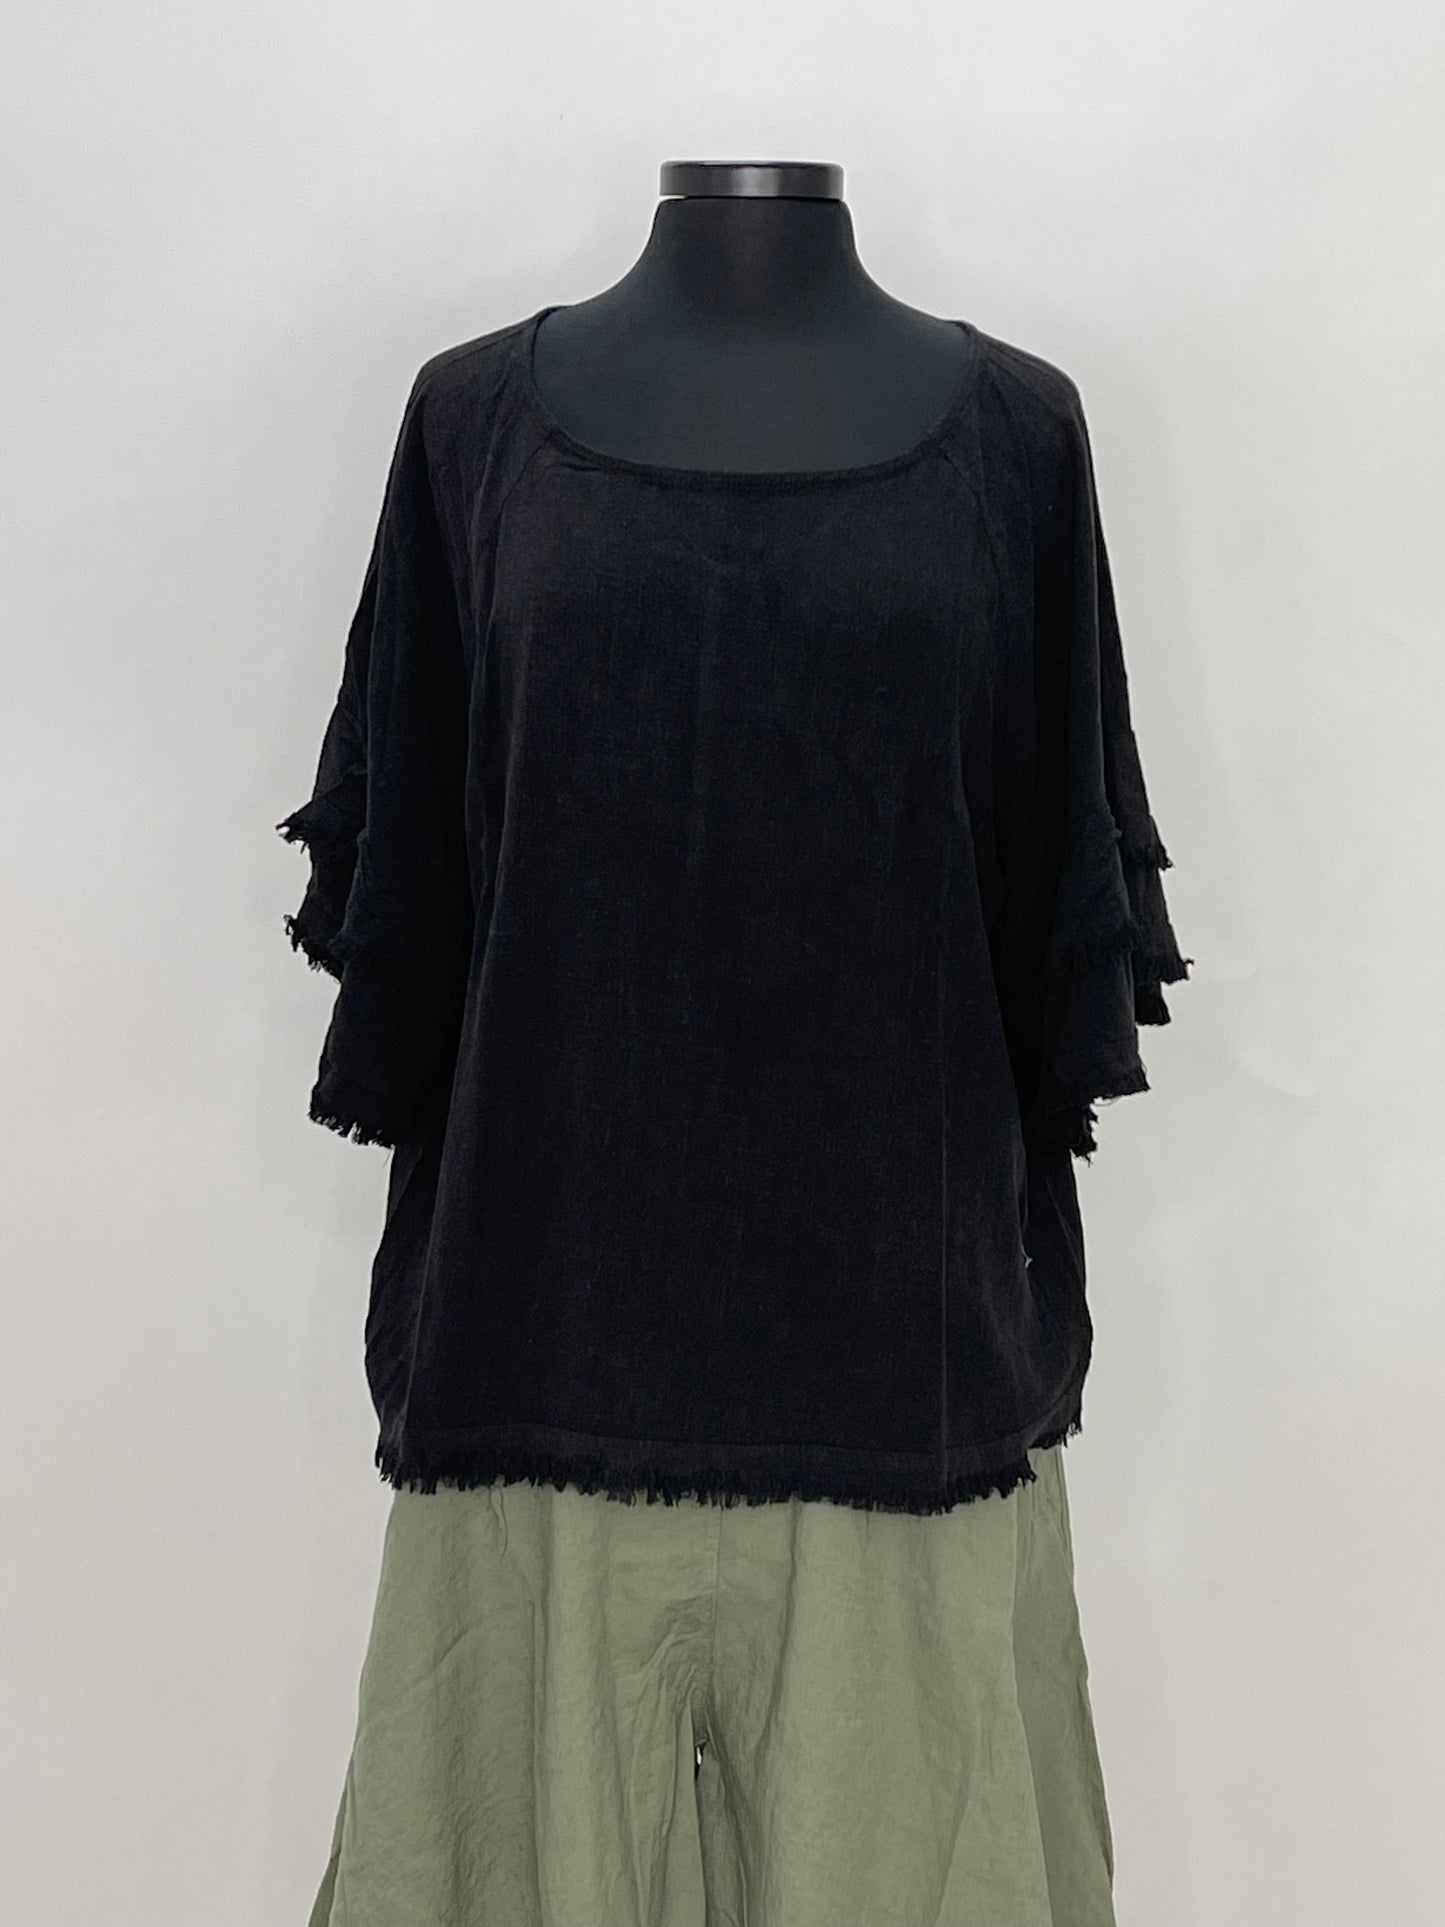 Load image into Gallery viewer, Black 3/4 Sleeve Fringe Top
